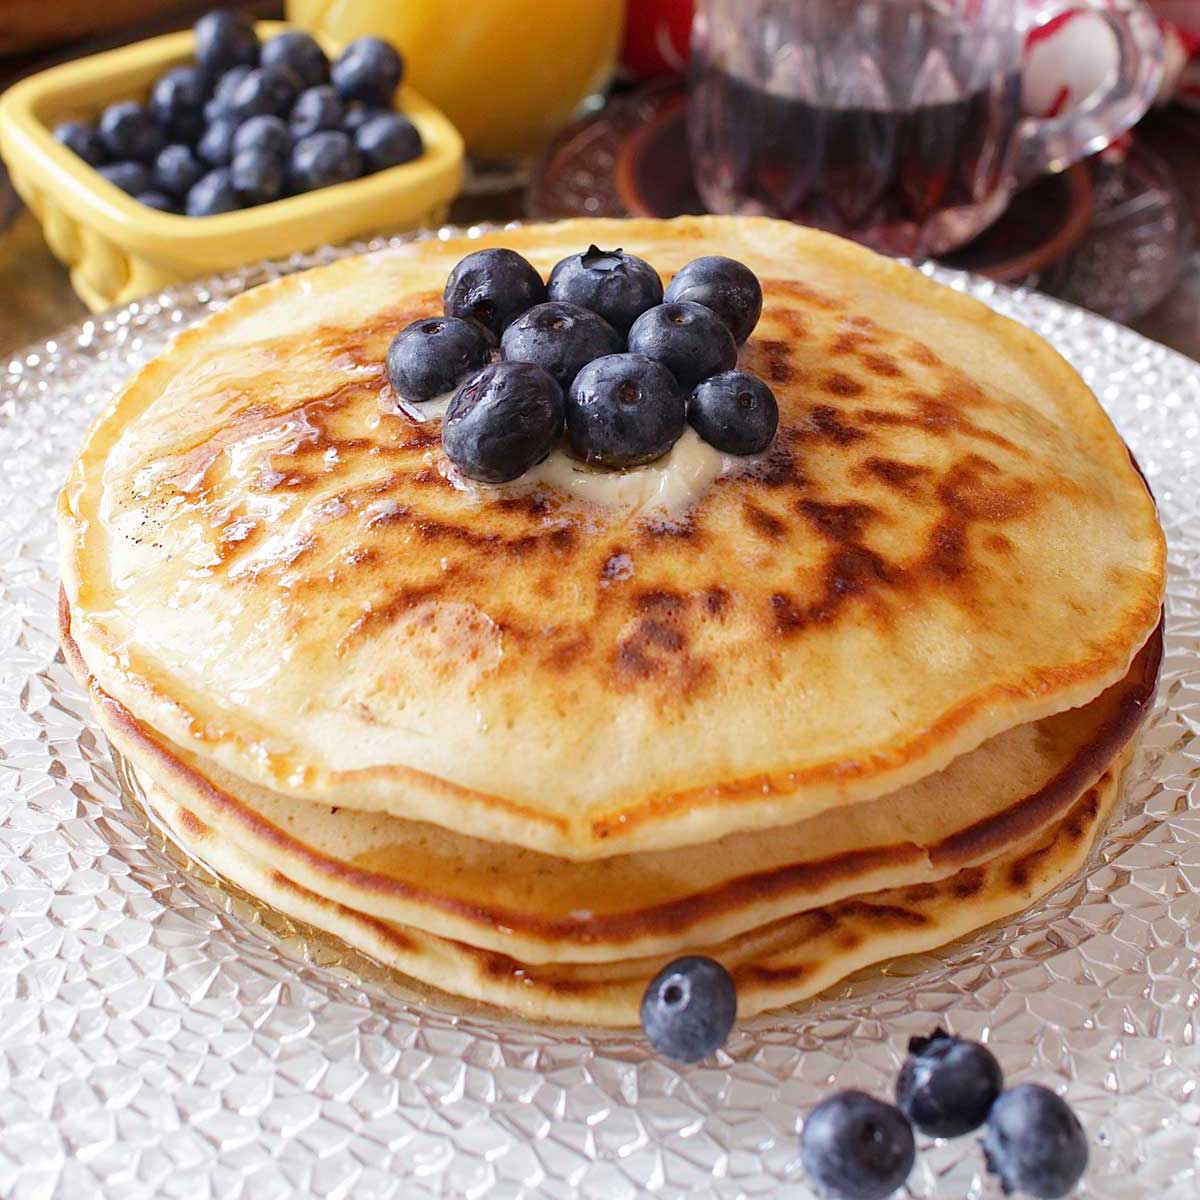 How To Make The Easiest Pancakes (In Less than 30 Minutes)